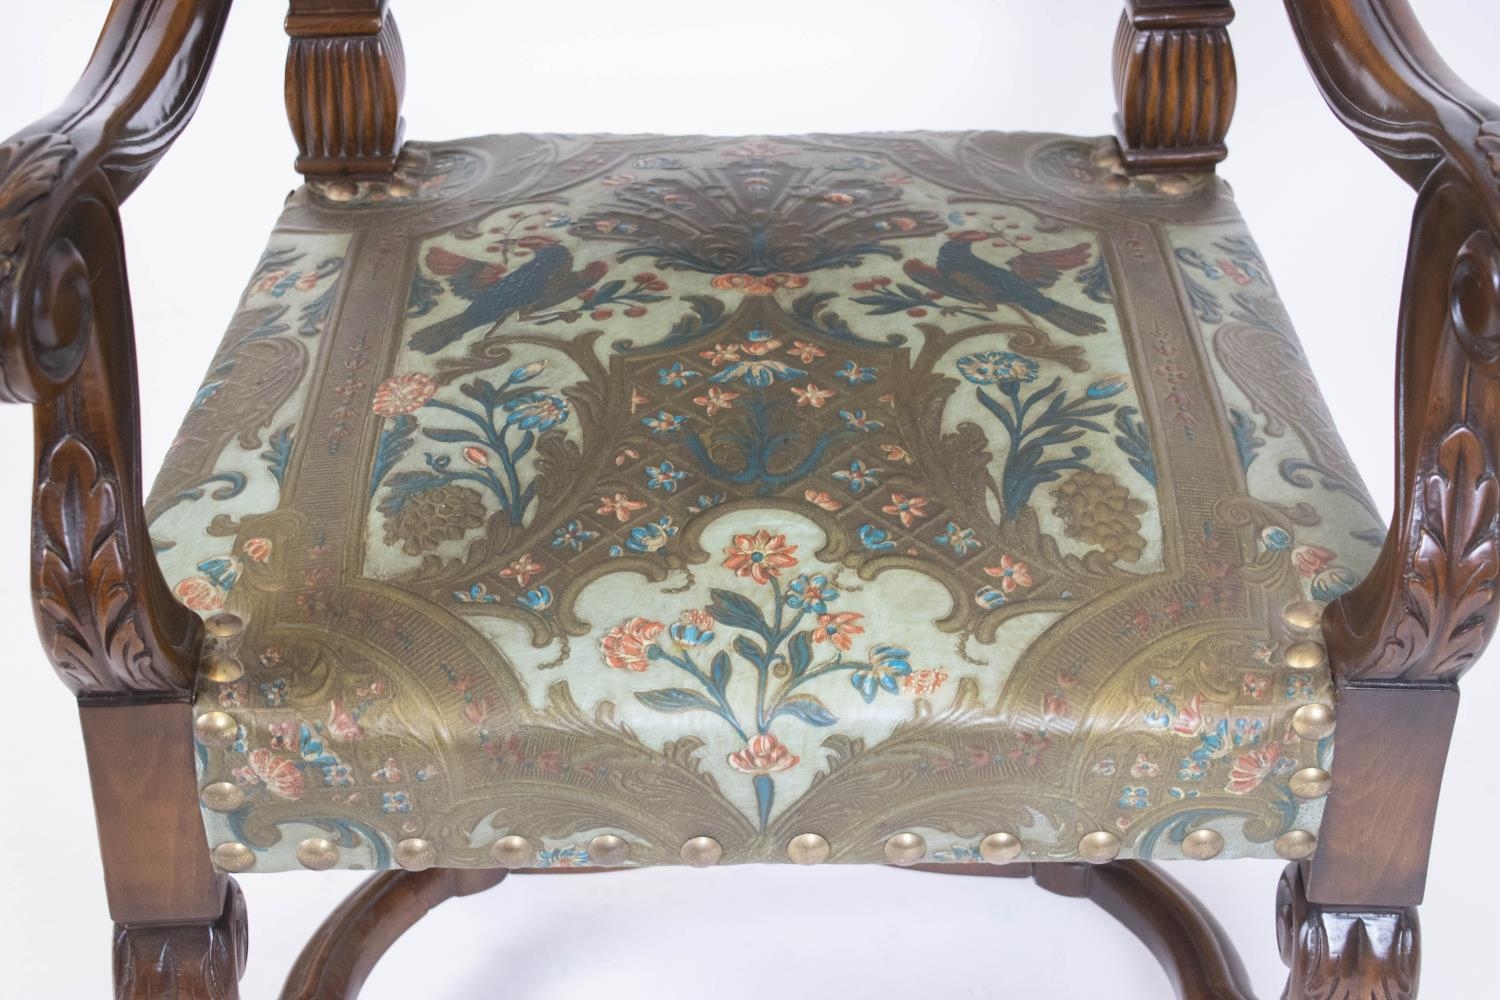 THRONE CHAIR, 121cm H x 72cm W x 70cm D, Louis XIV style in polychrome embossed leather. - Image 4 of 5